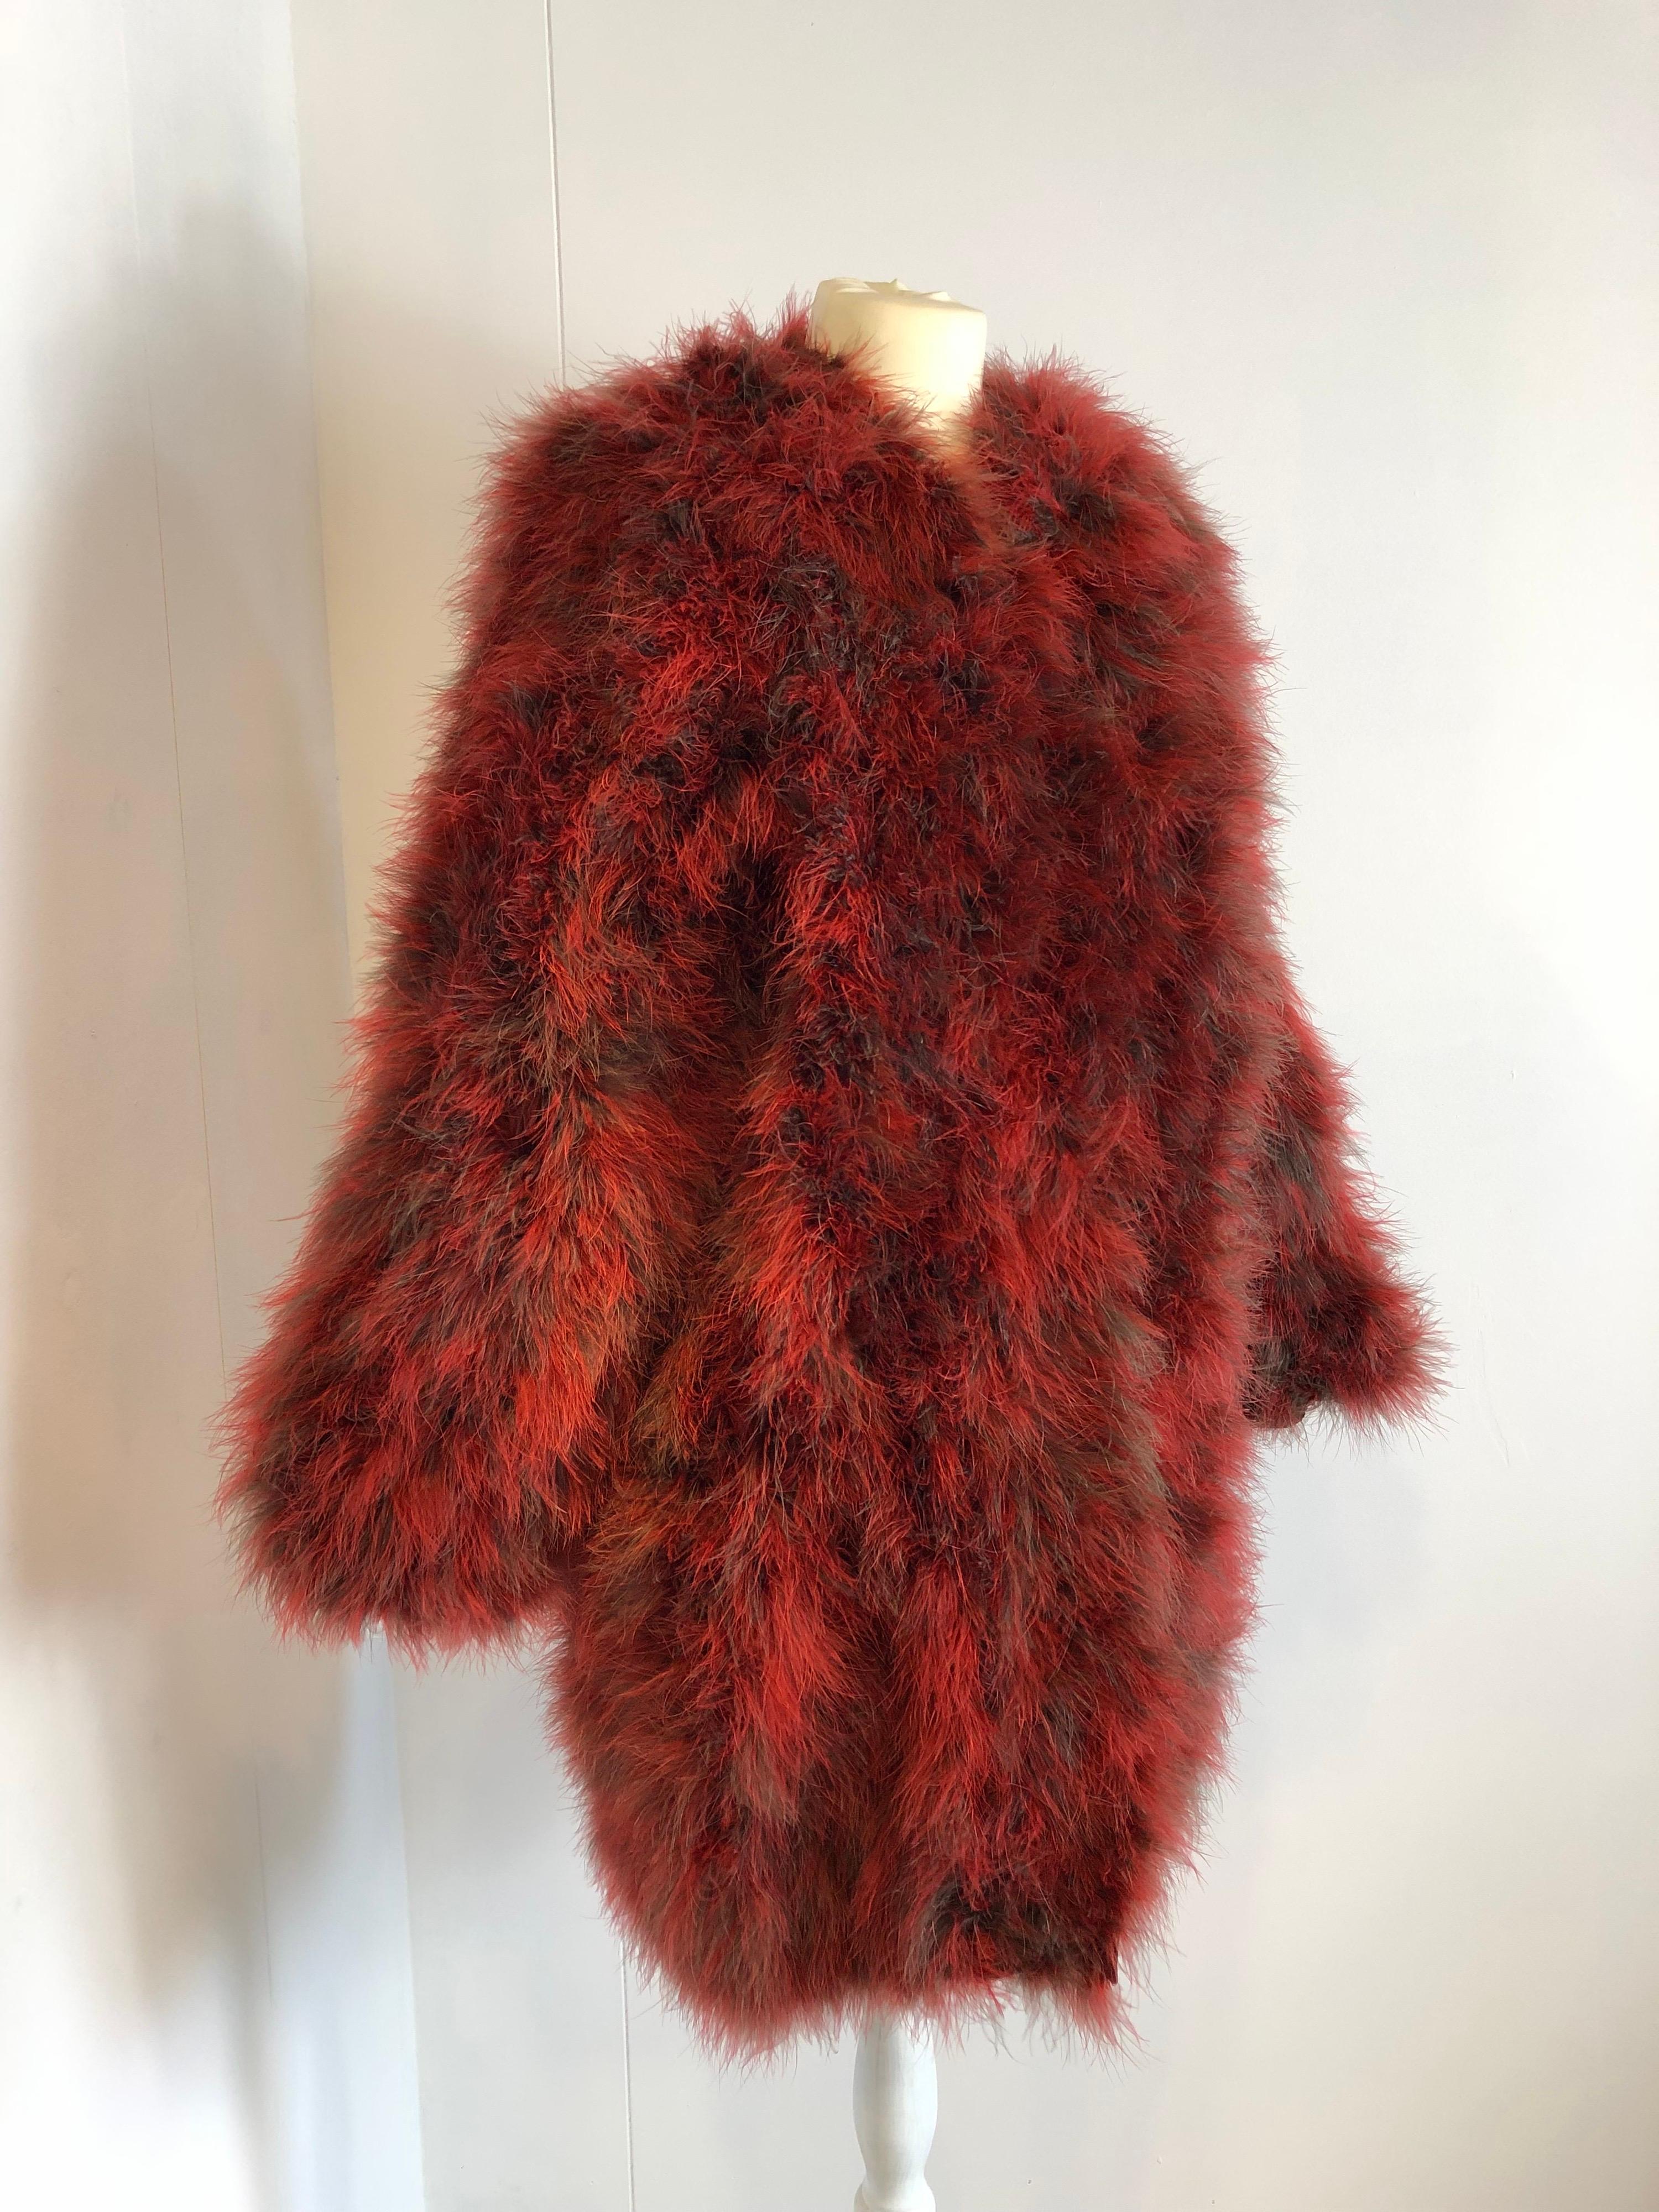 red feather coat